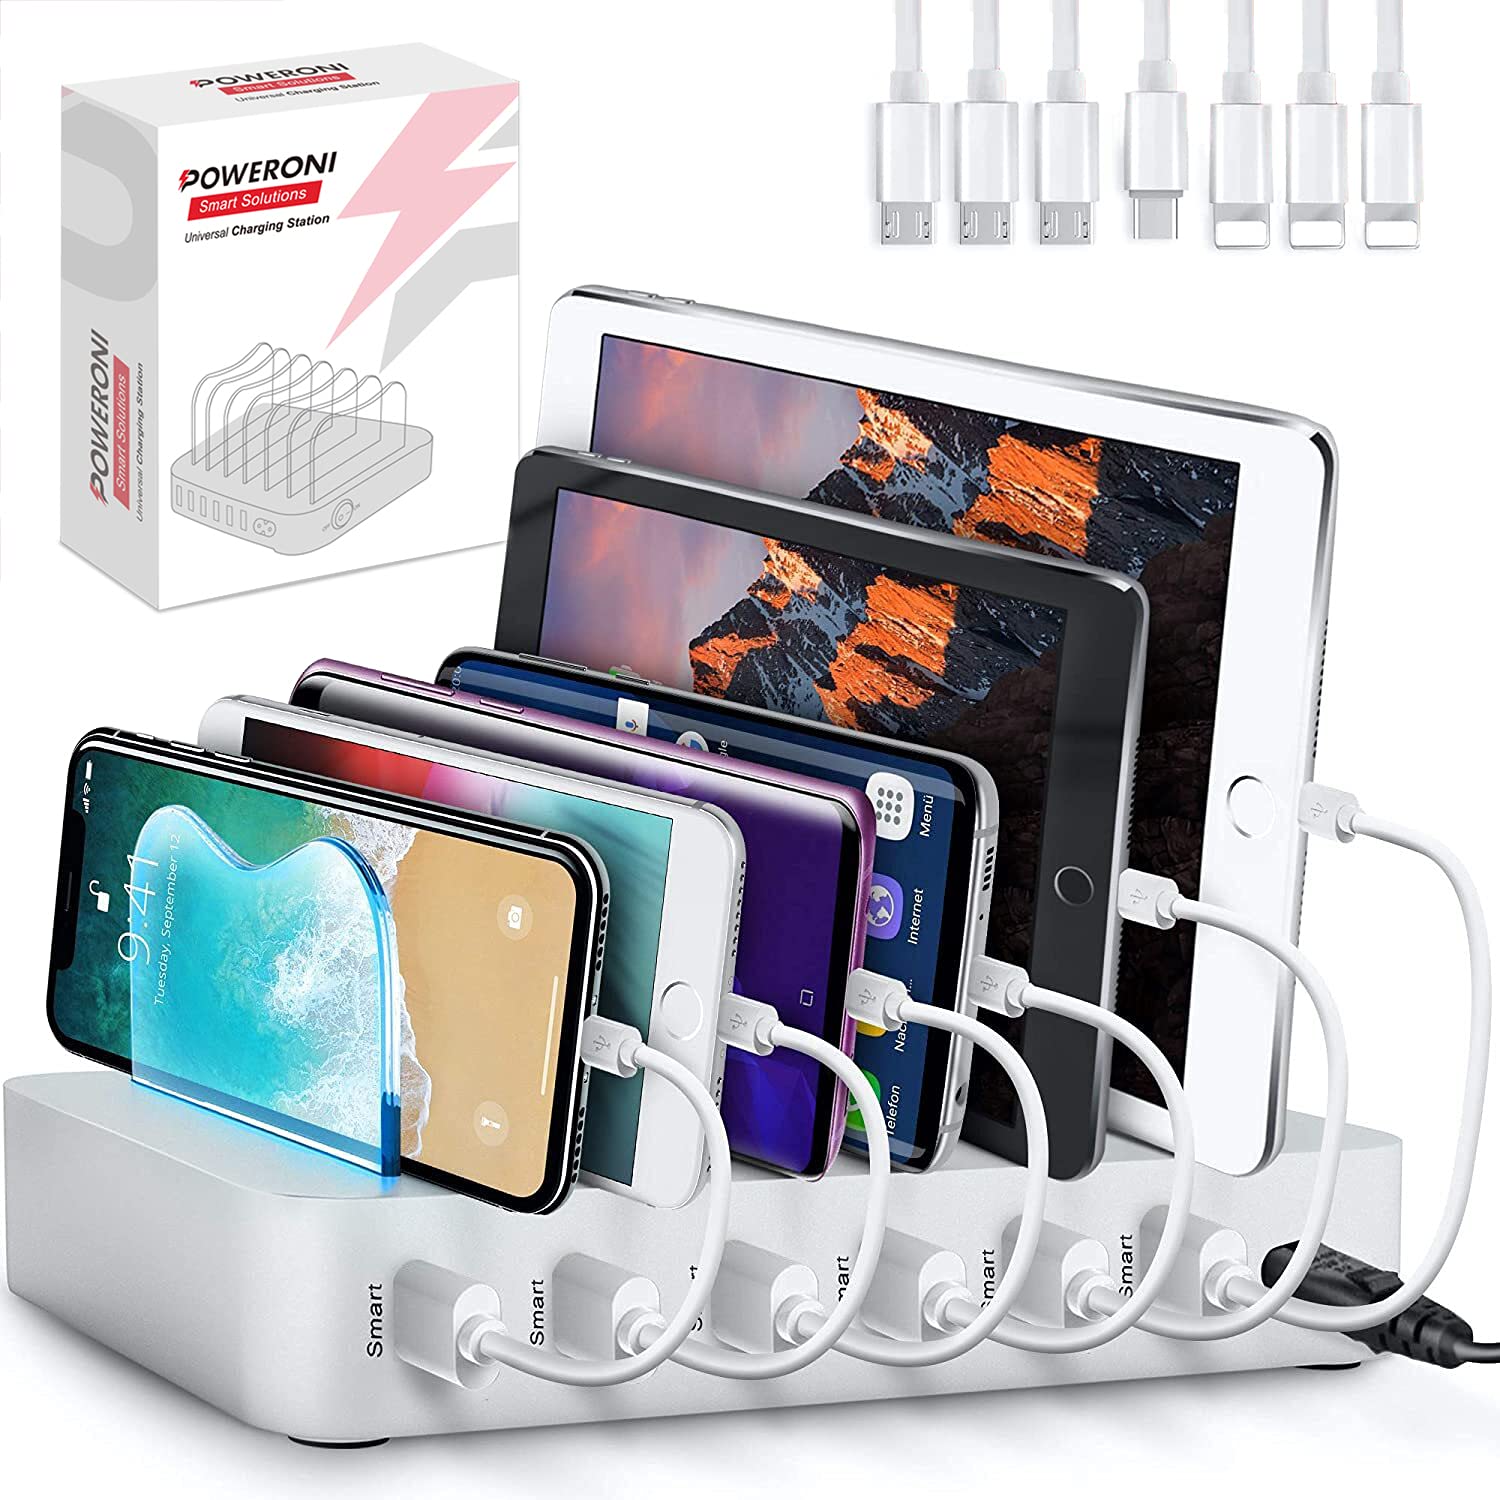 Poweroni USB Charging Dock - 6-Port - Fast Charging Station for Multiple Devices Apple - Multi Phone Charger Station - Charging Station - for Apple iPad iPhone and Android Cell Phone and Tablet  - Acceptable